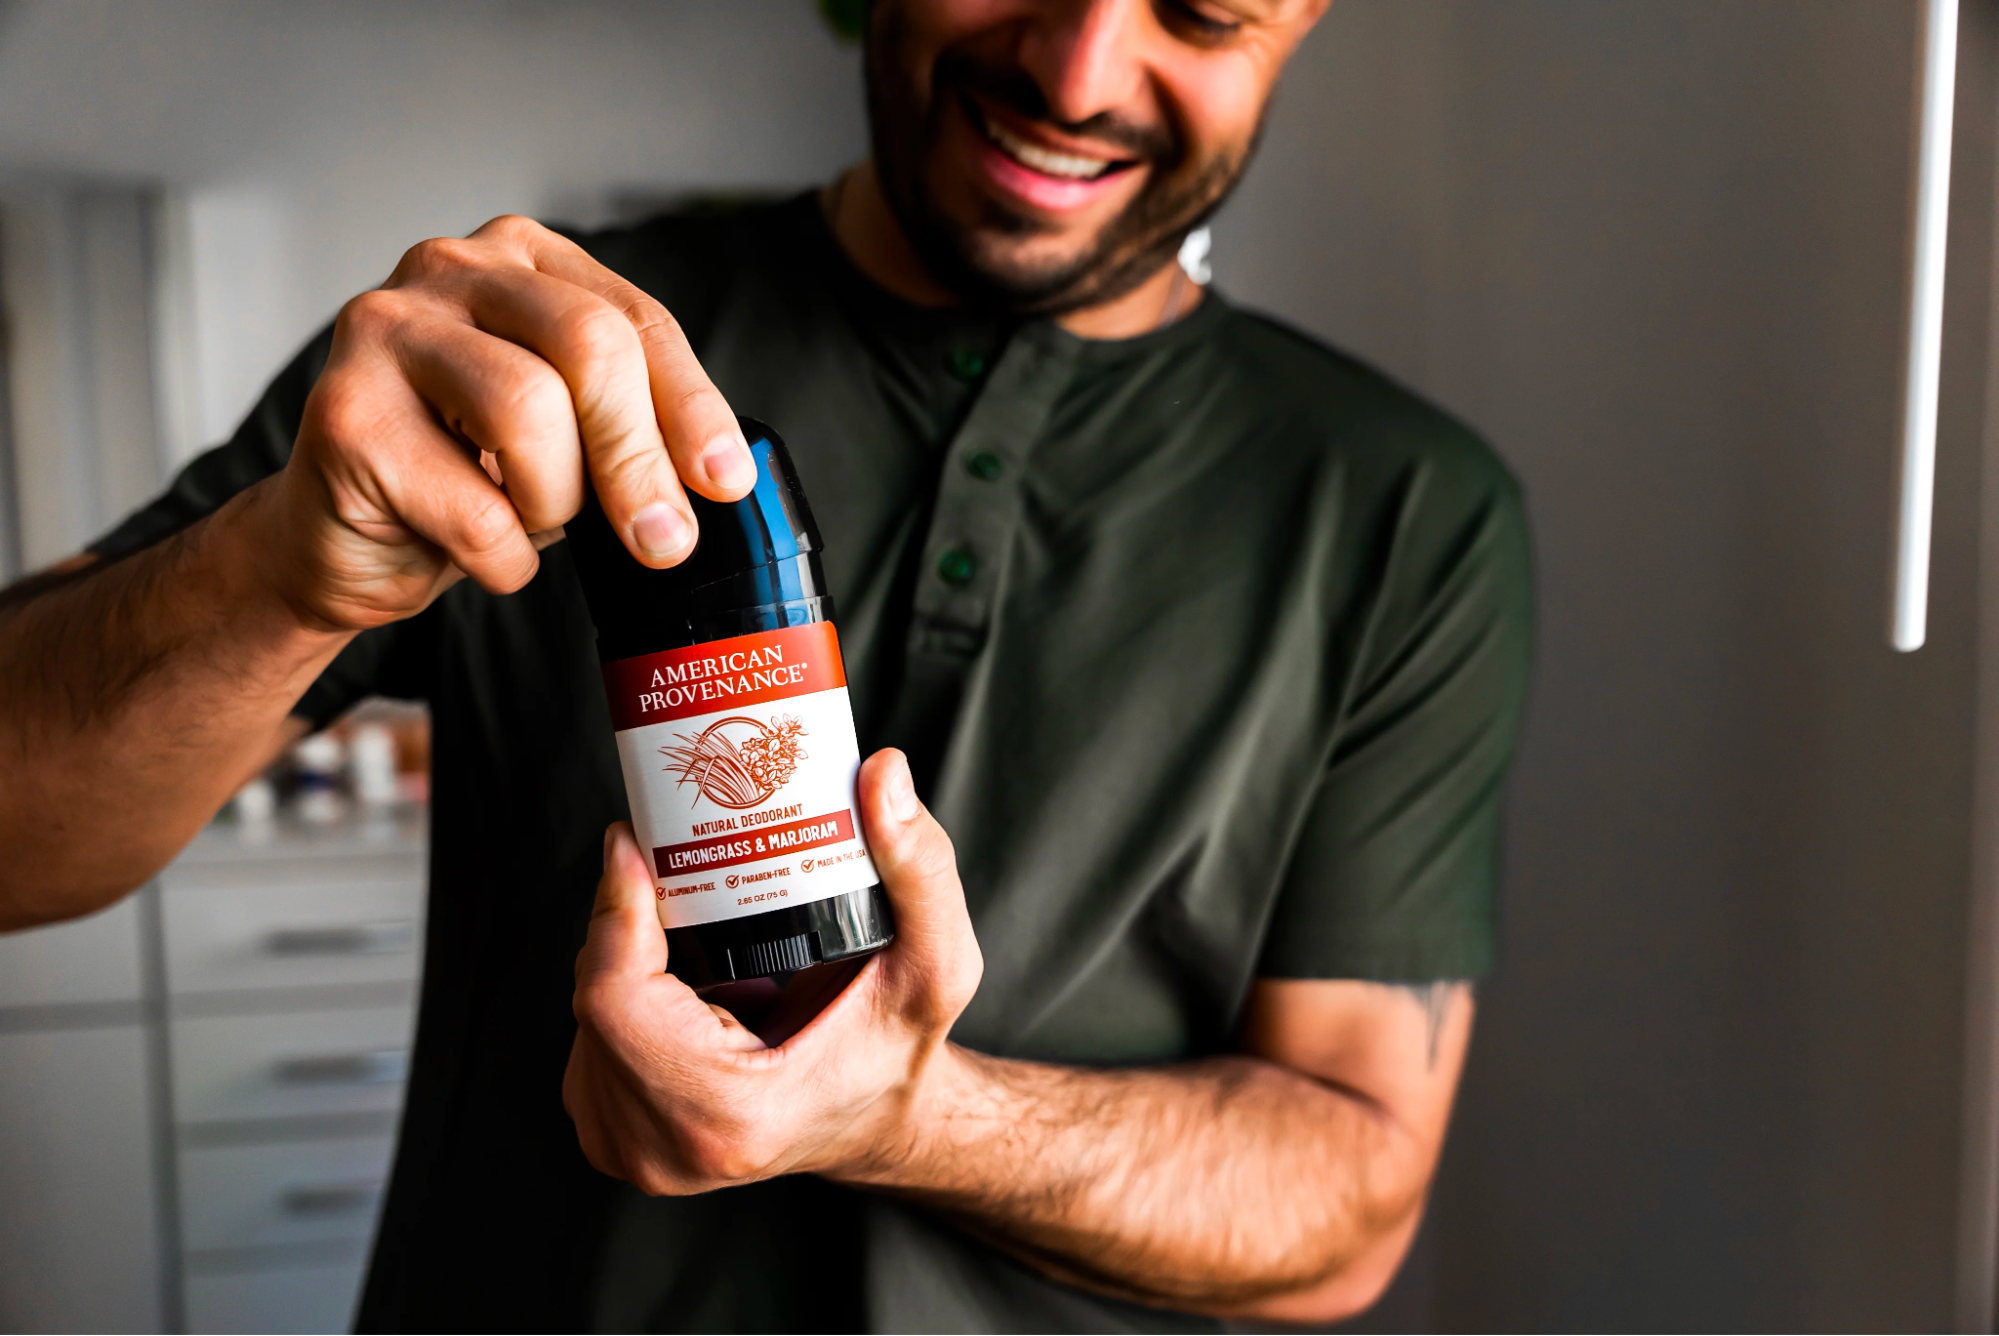 A person holds a trending product, natural deodorant, up to the camera